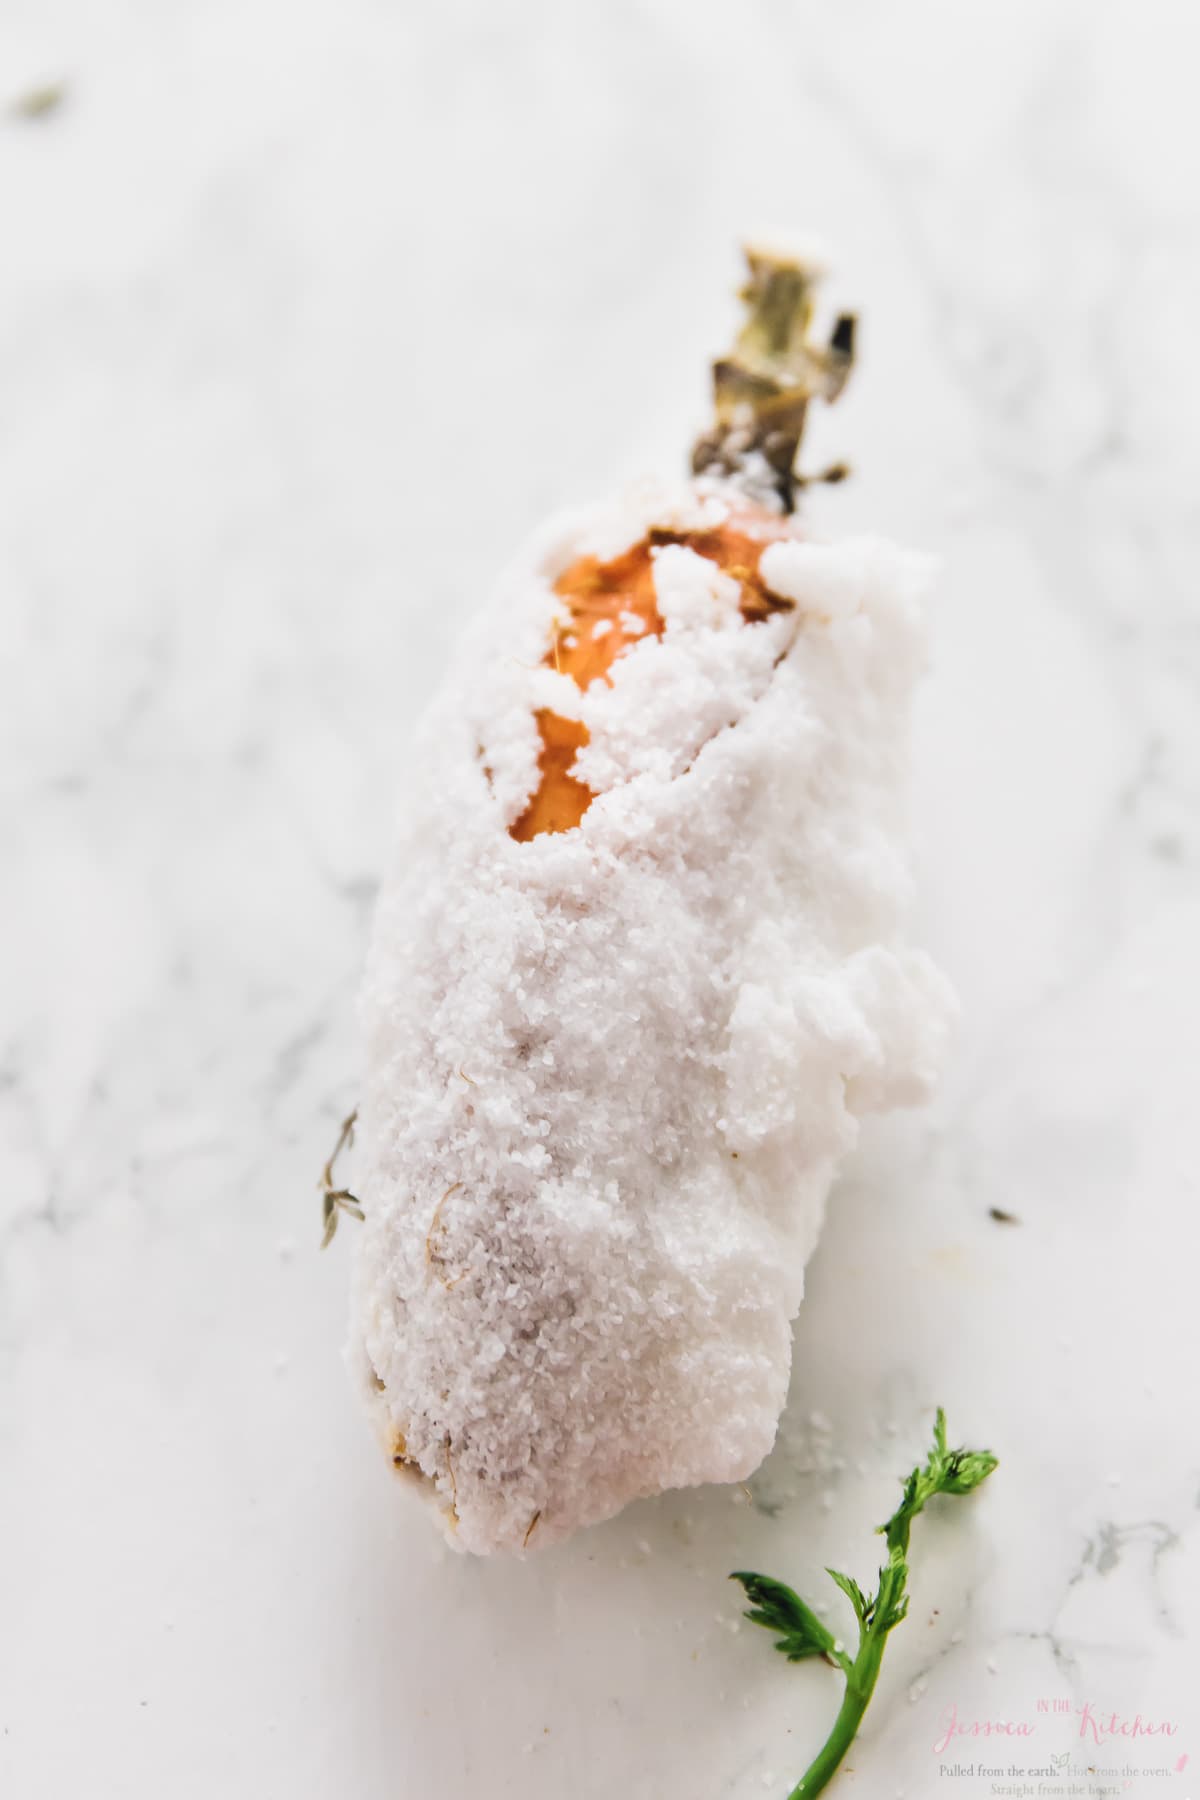 A carrot covered in salt. 